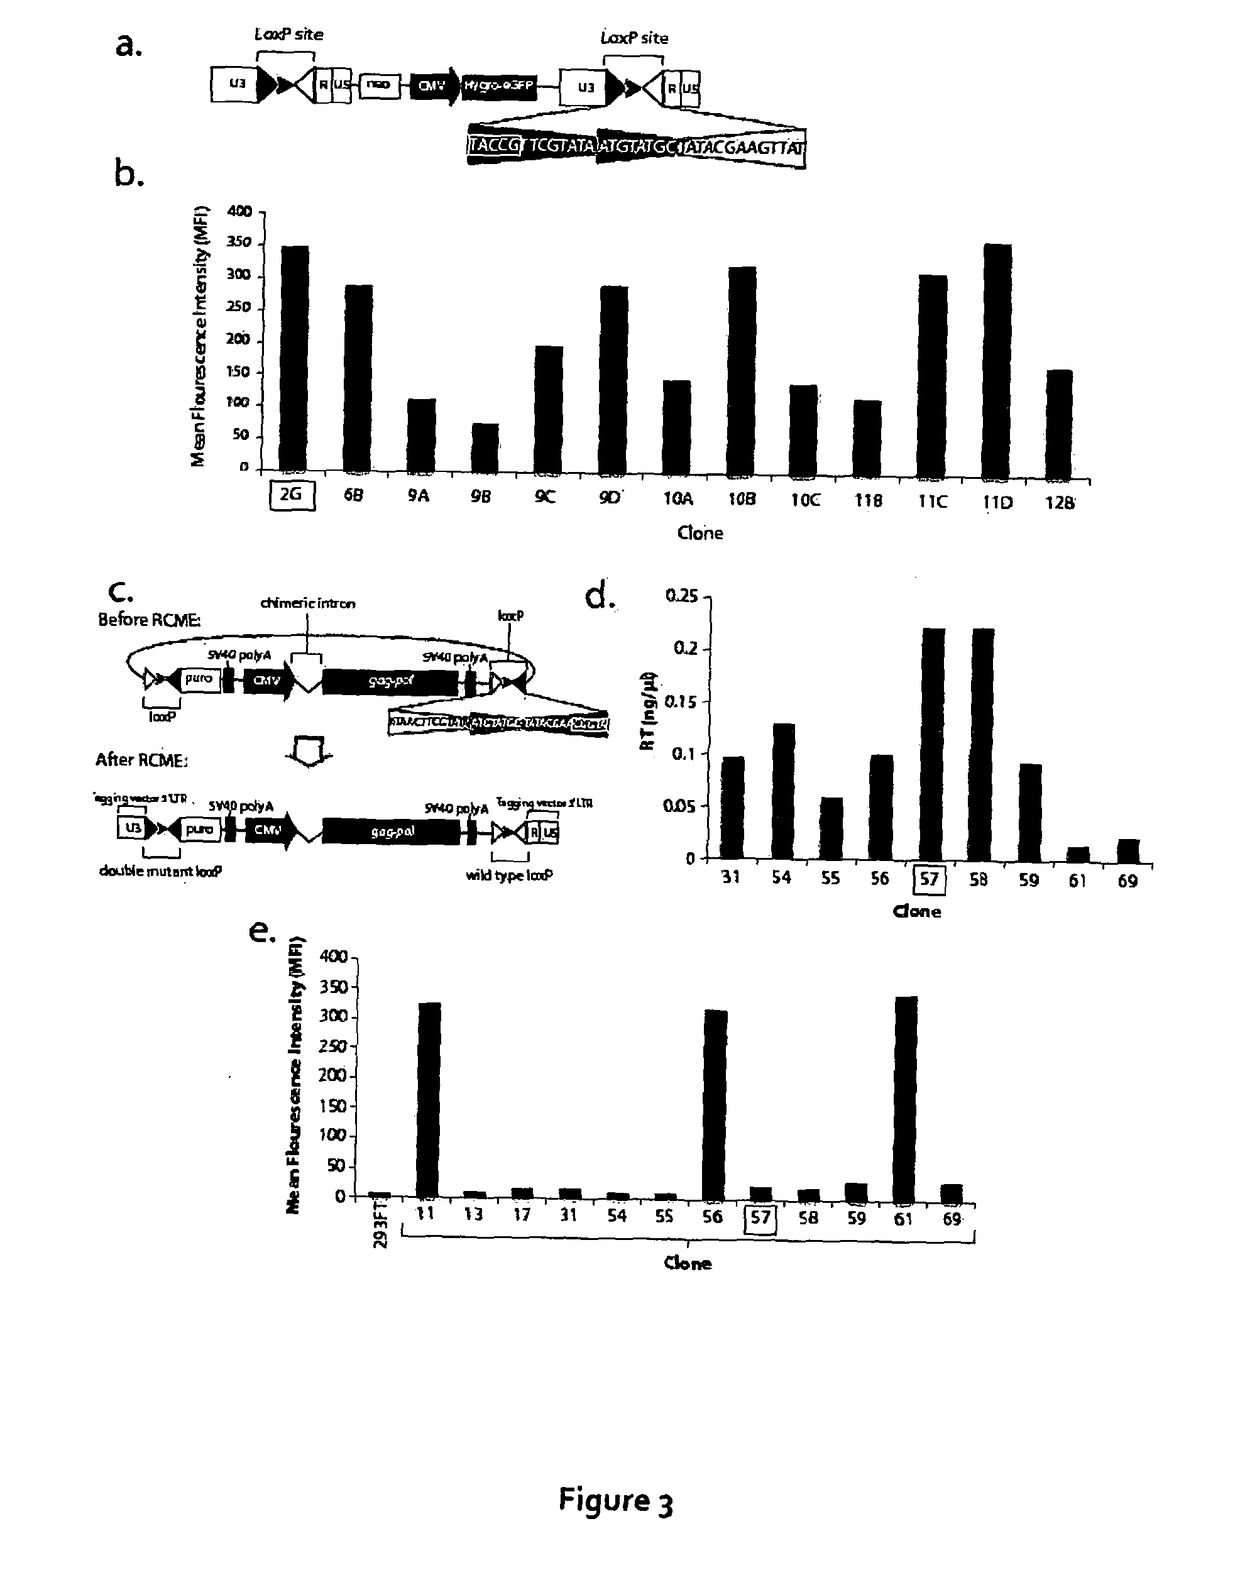 Materials and methods relating to packaging cell lines